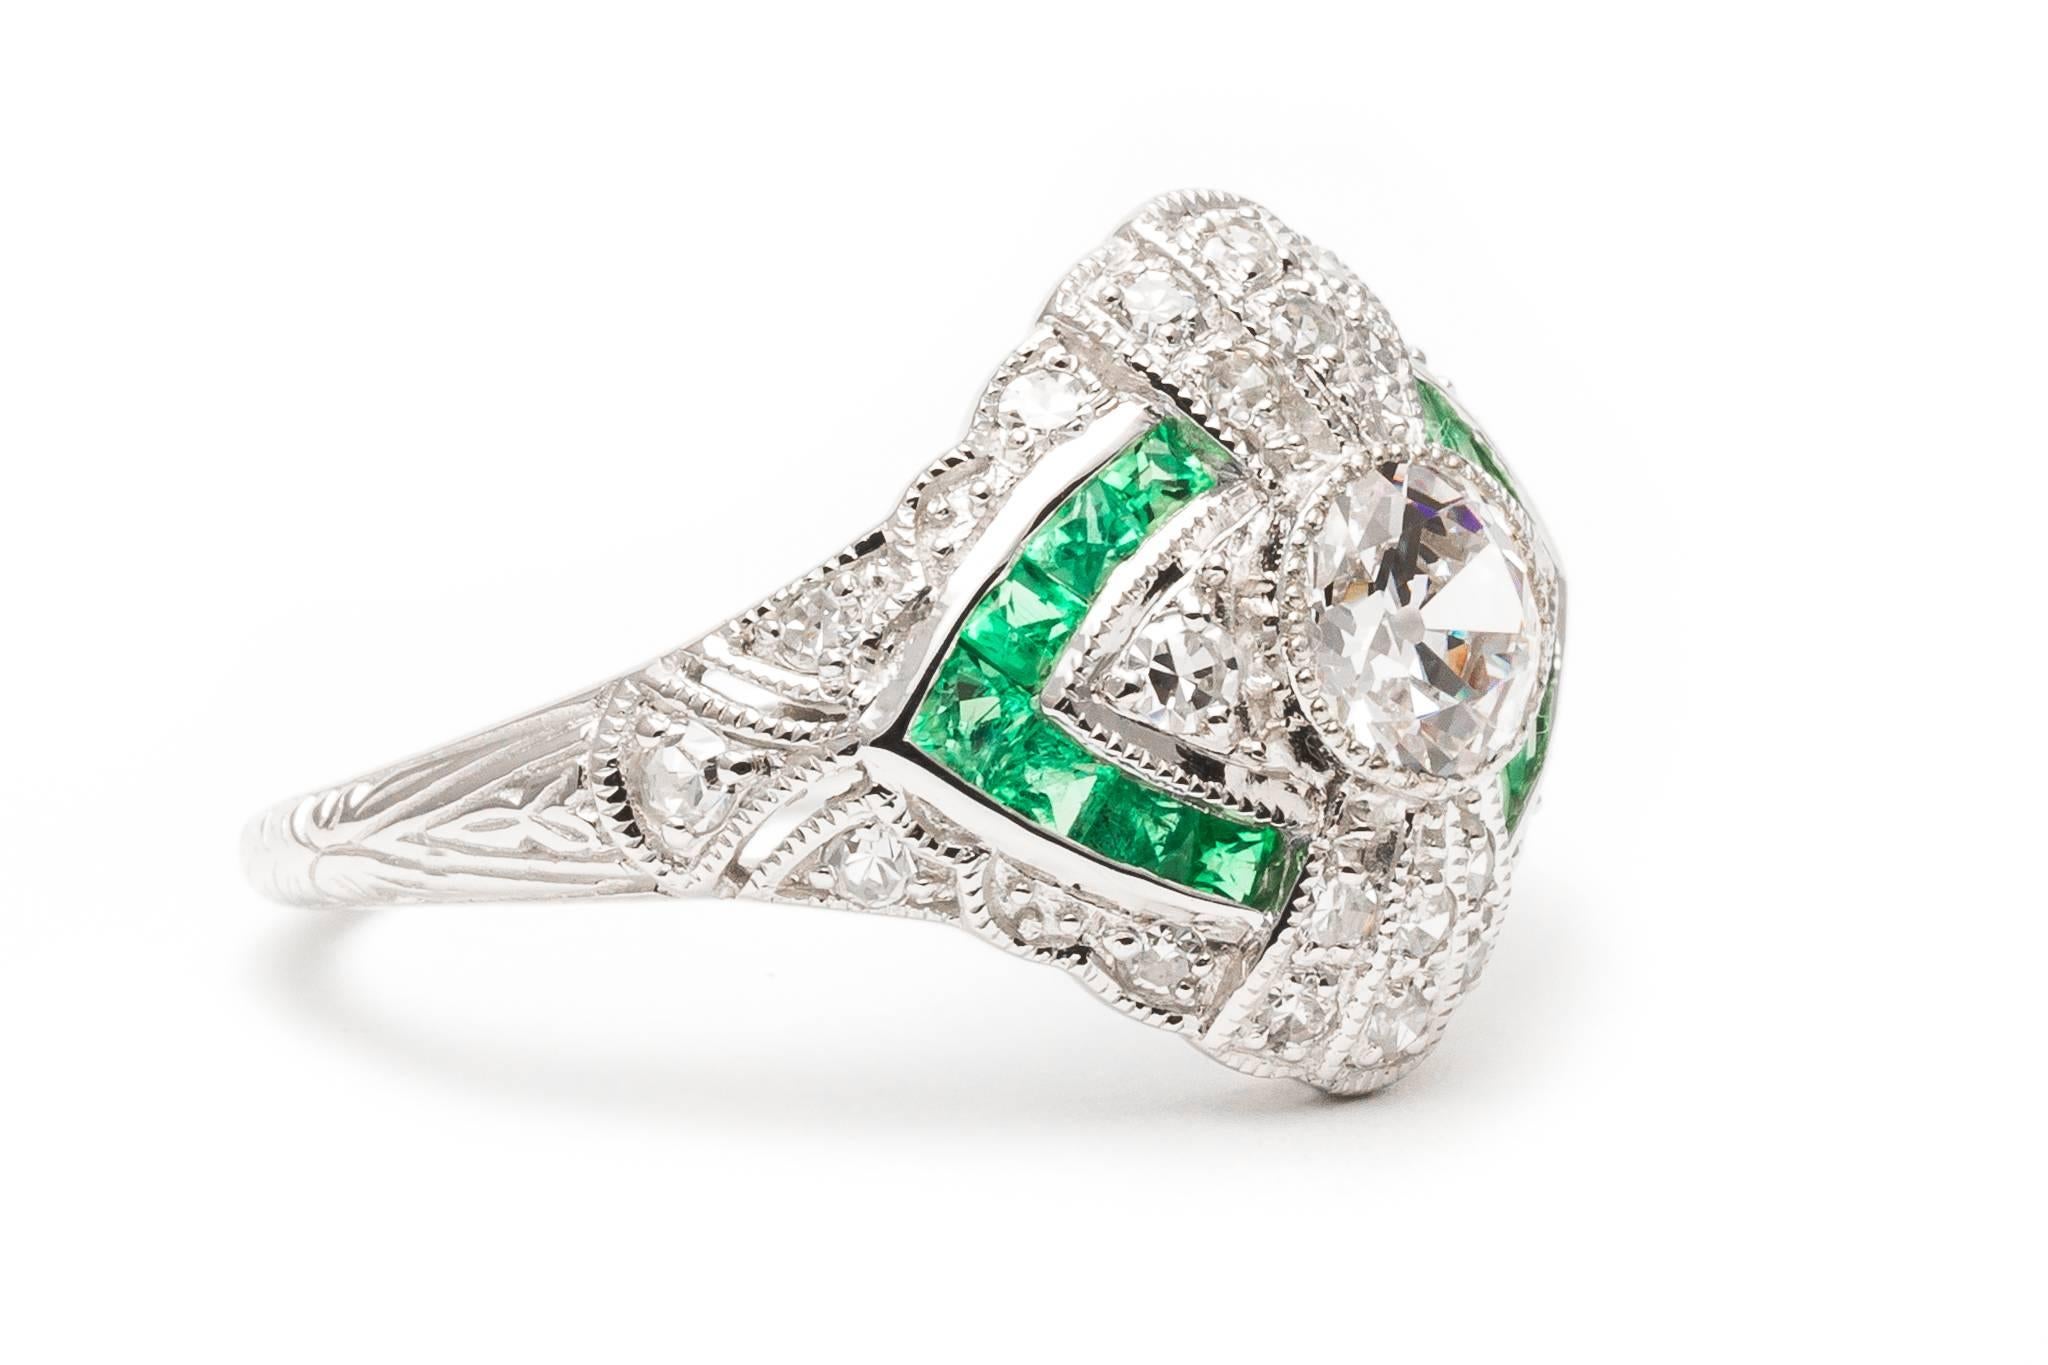 A beautiful and very vibrant French cut emerald, and antique cut Diamond ring.  Featuring a European cut diamond center framed by pave set diamond rays and French cut emeralds.

Grading as superb VS clarity and G colorless color, the center is a